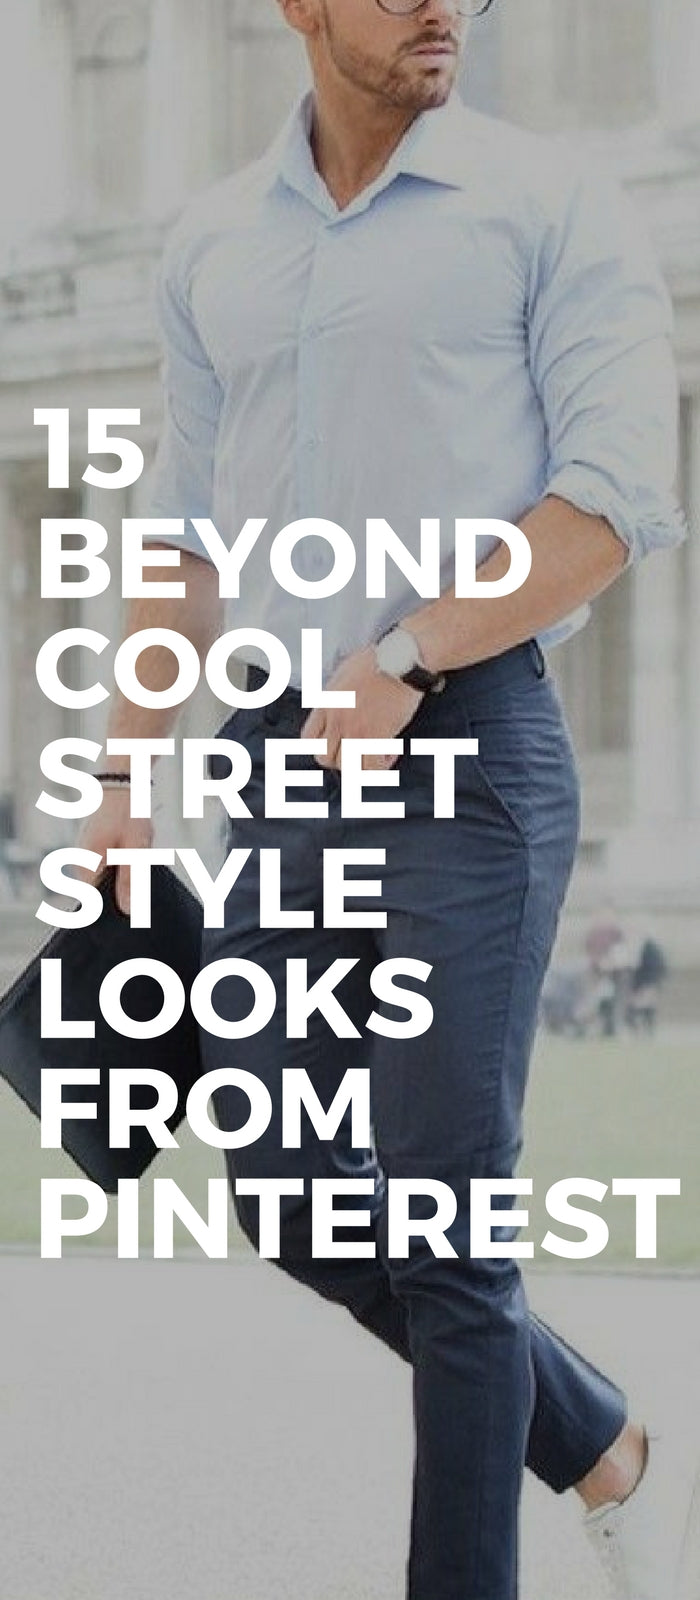 15 Beyond Cool Street Style Looks From Pinterest – LIFESTYLE BY PS